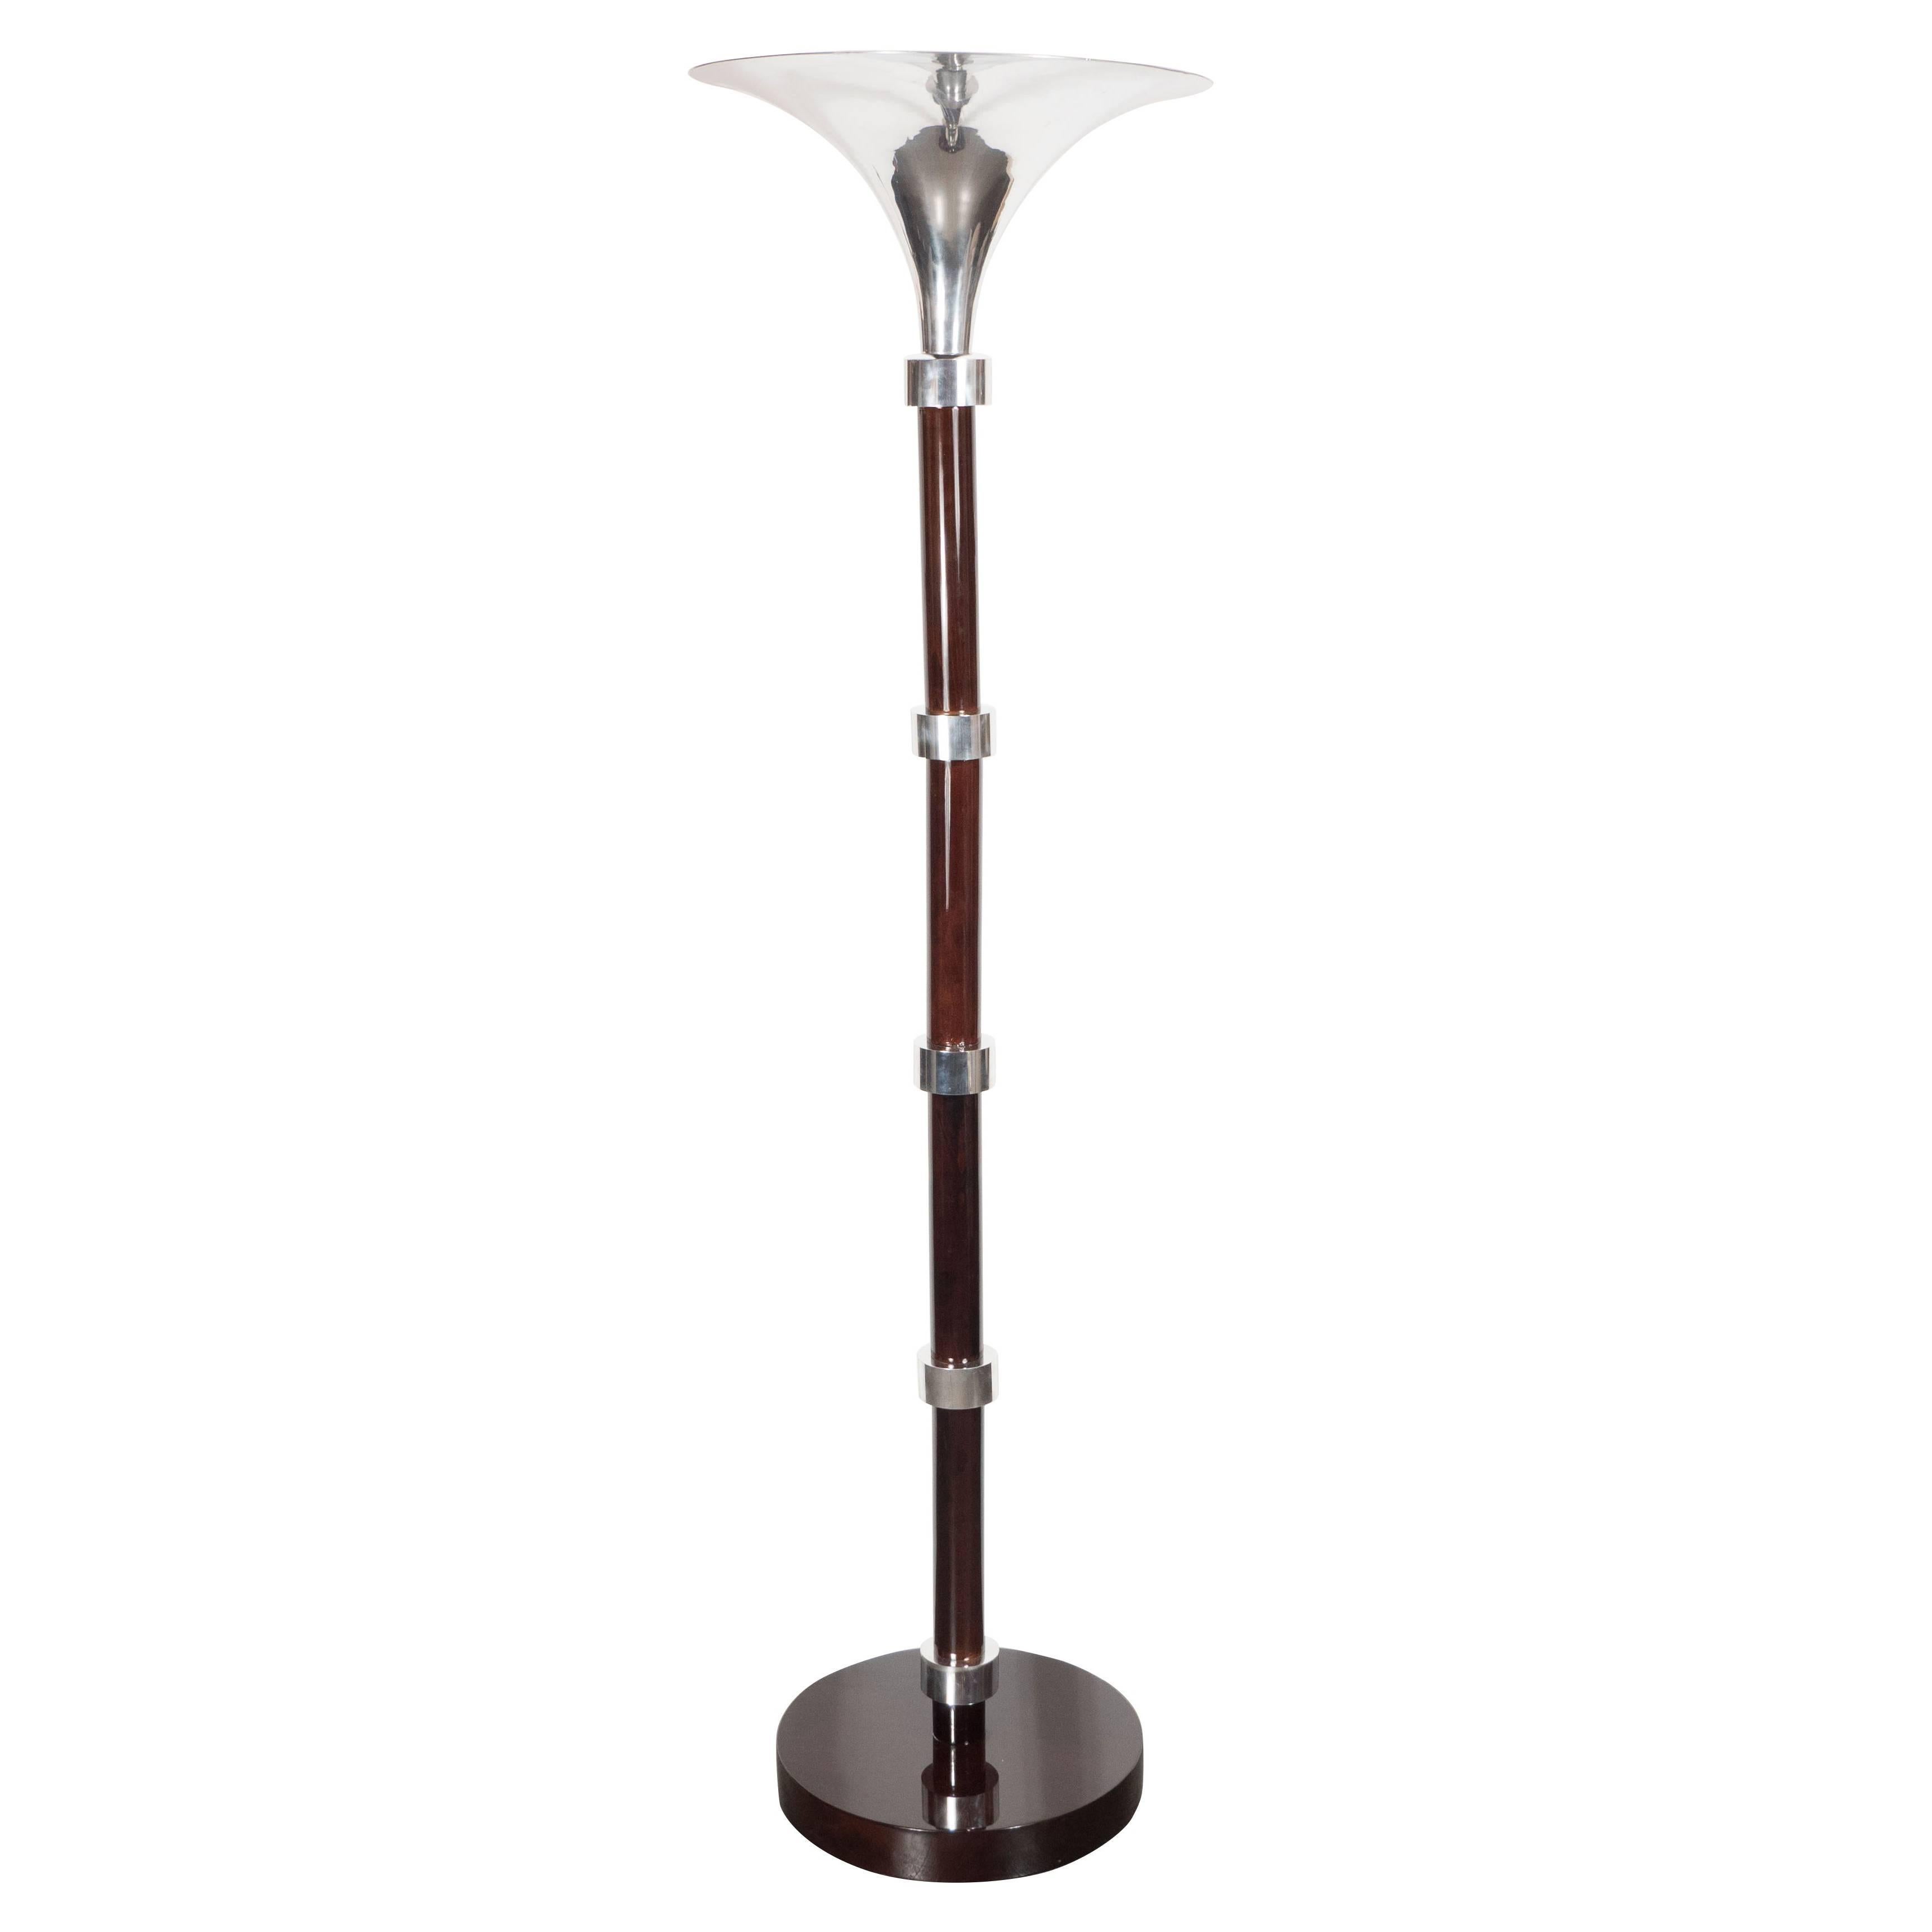 French Art Deco Mahogany and Chrome Skyscraper Style Torchiere Lamp